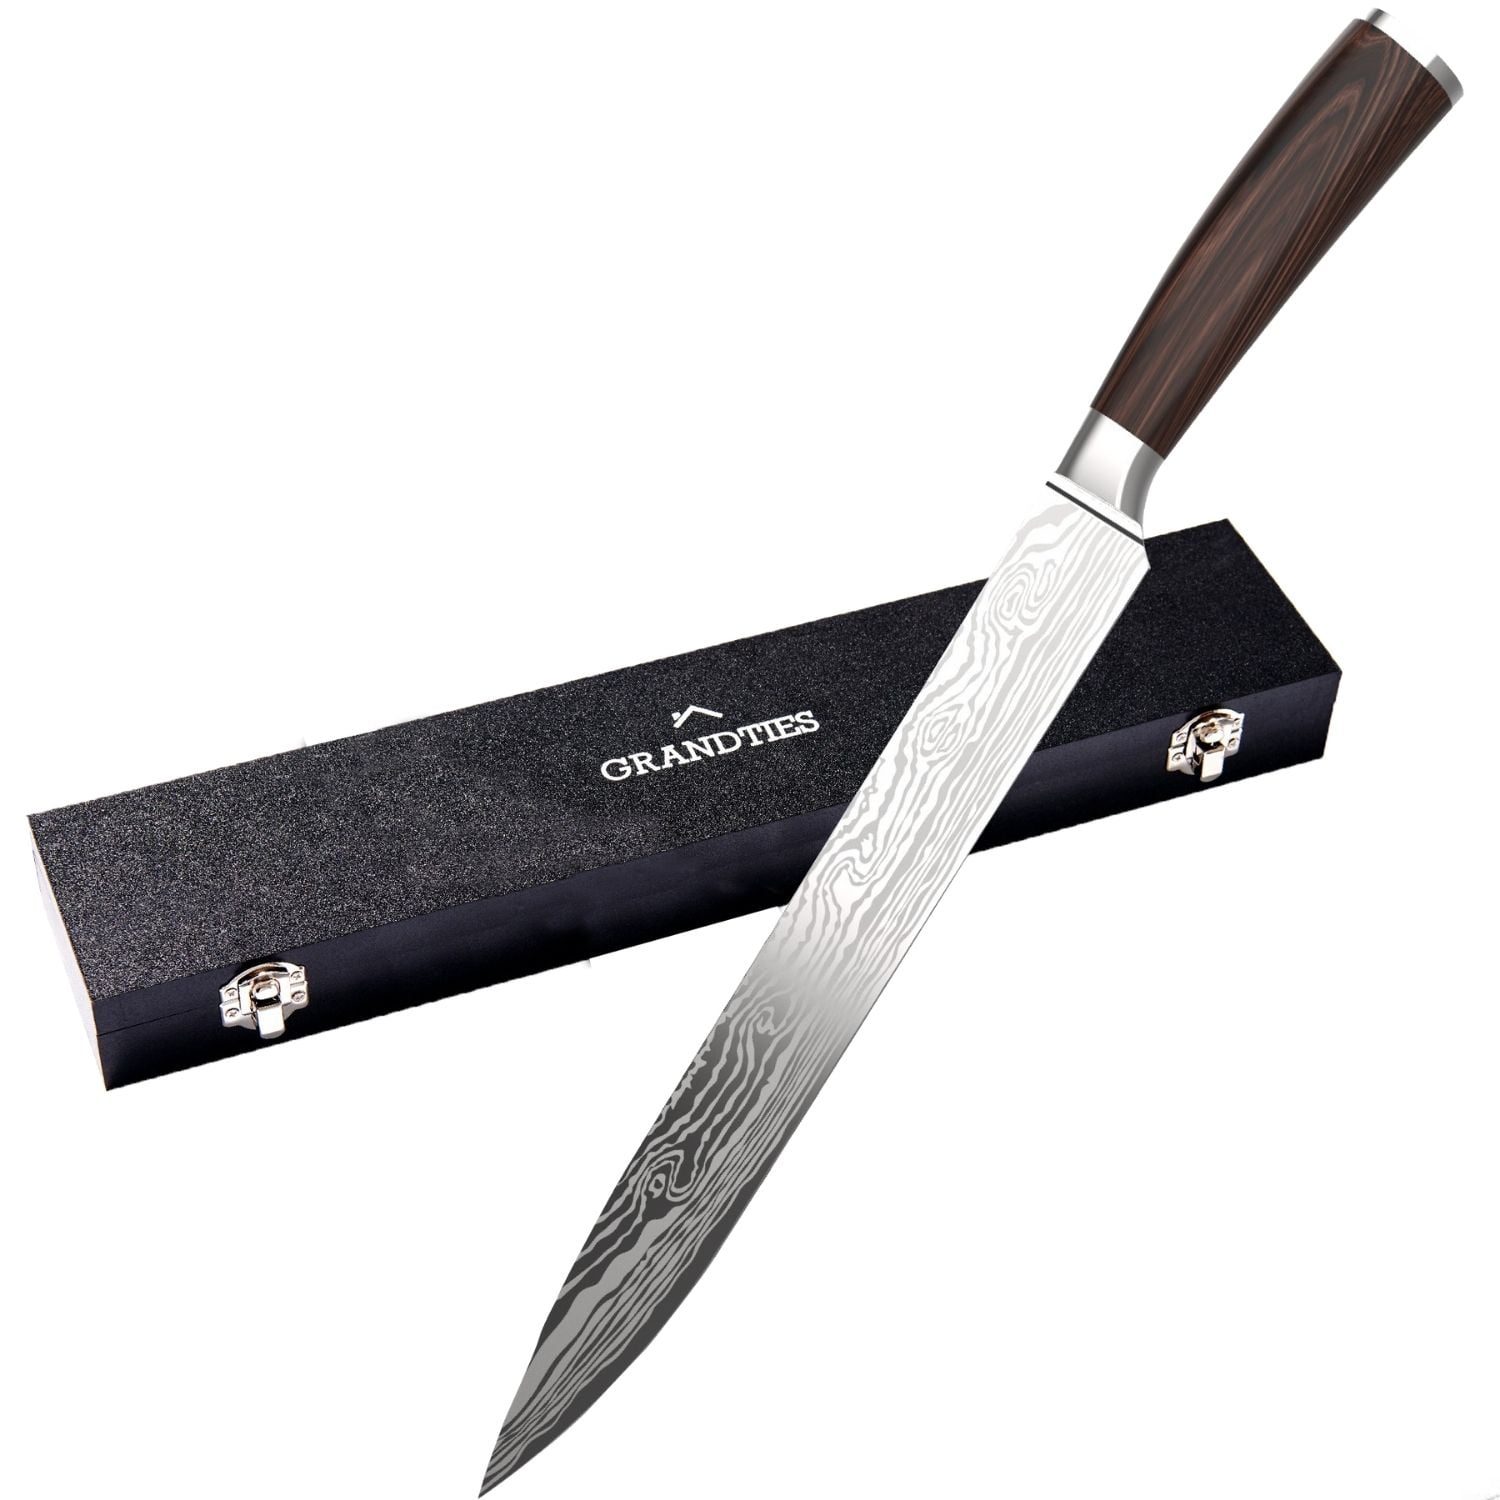 Giesser since 1776, Made in Germany, Chefs Knife 8 inch - Rock n Chop  Knife, BBQ boys knife, German Chopping knife for meat and vegetables